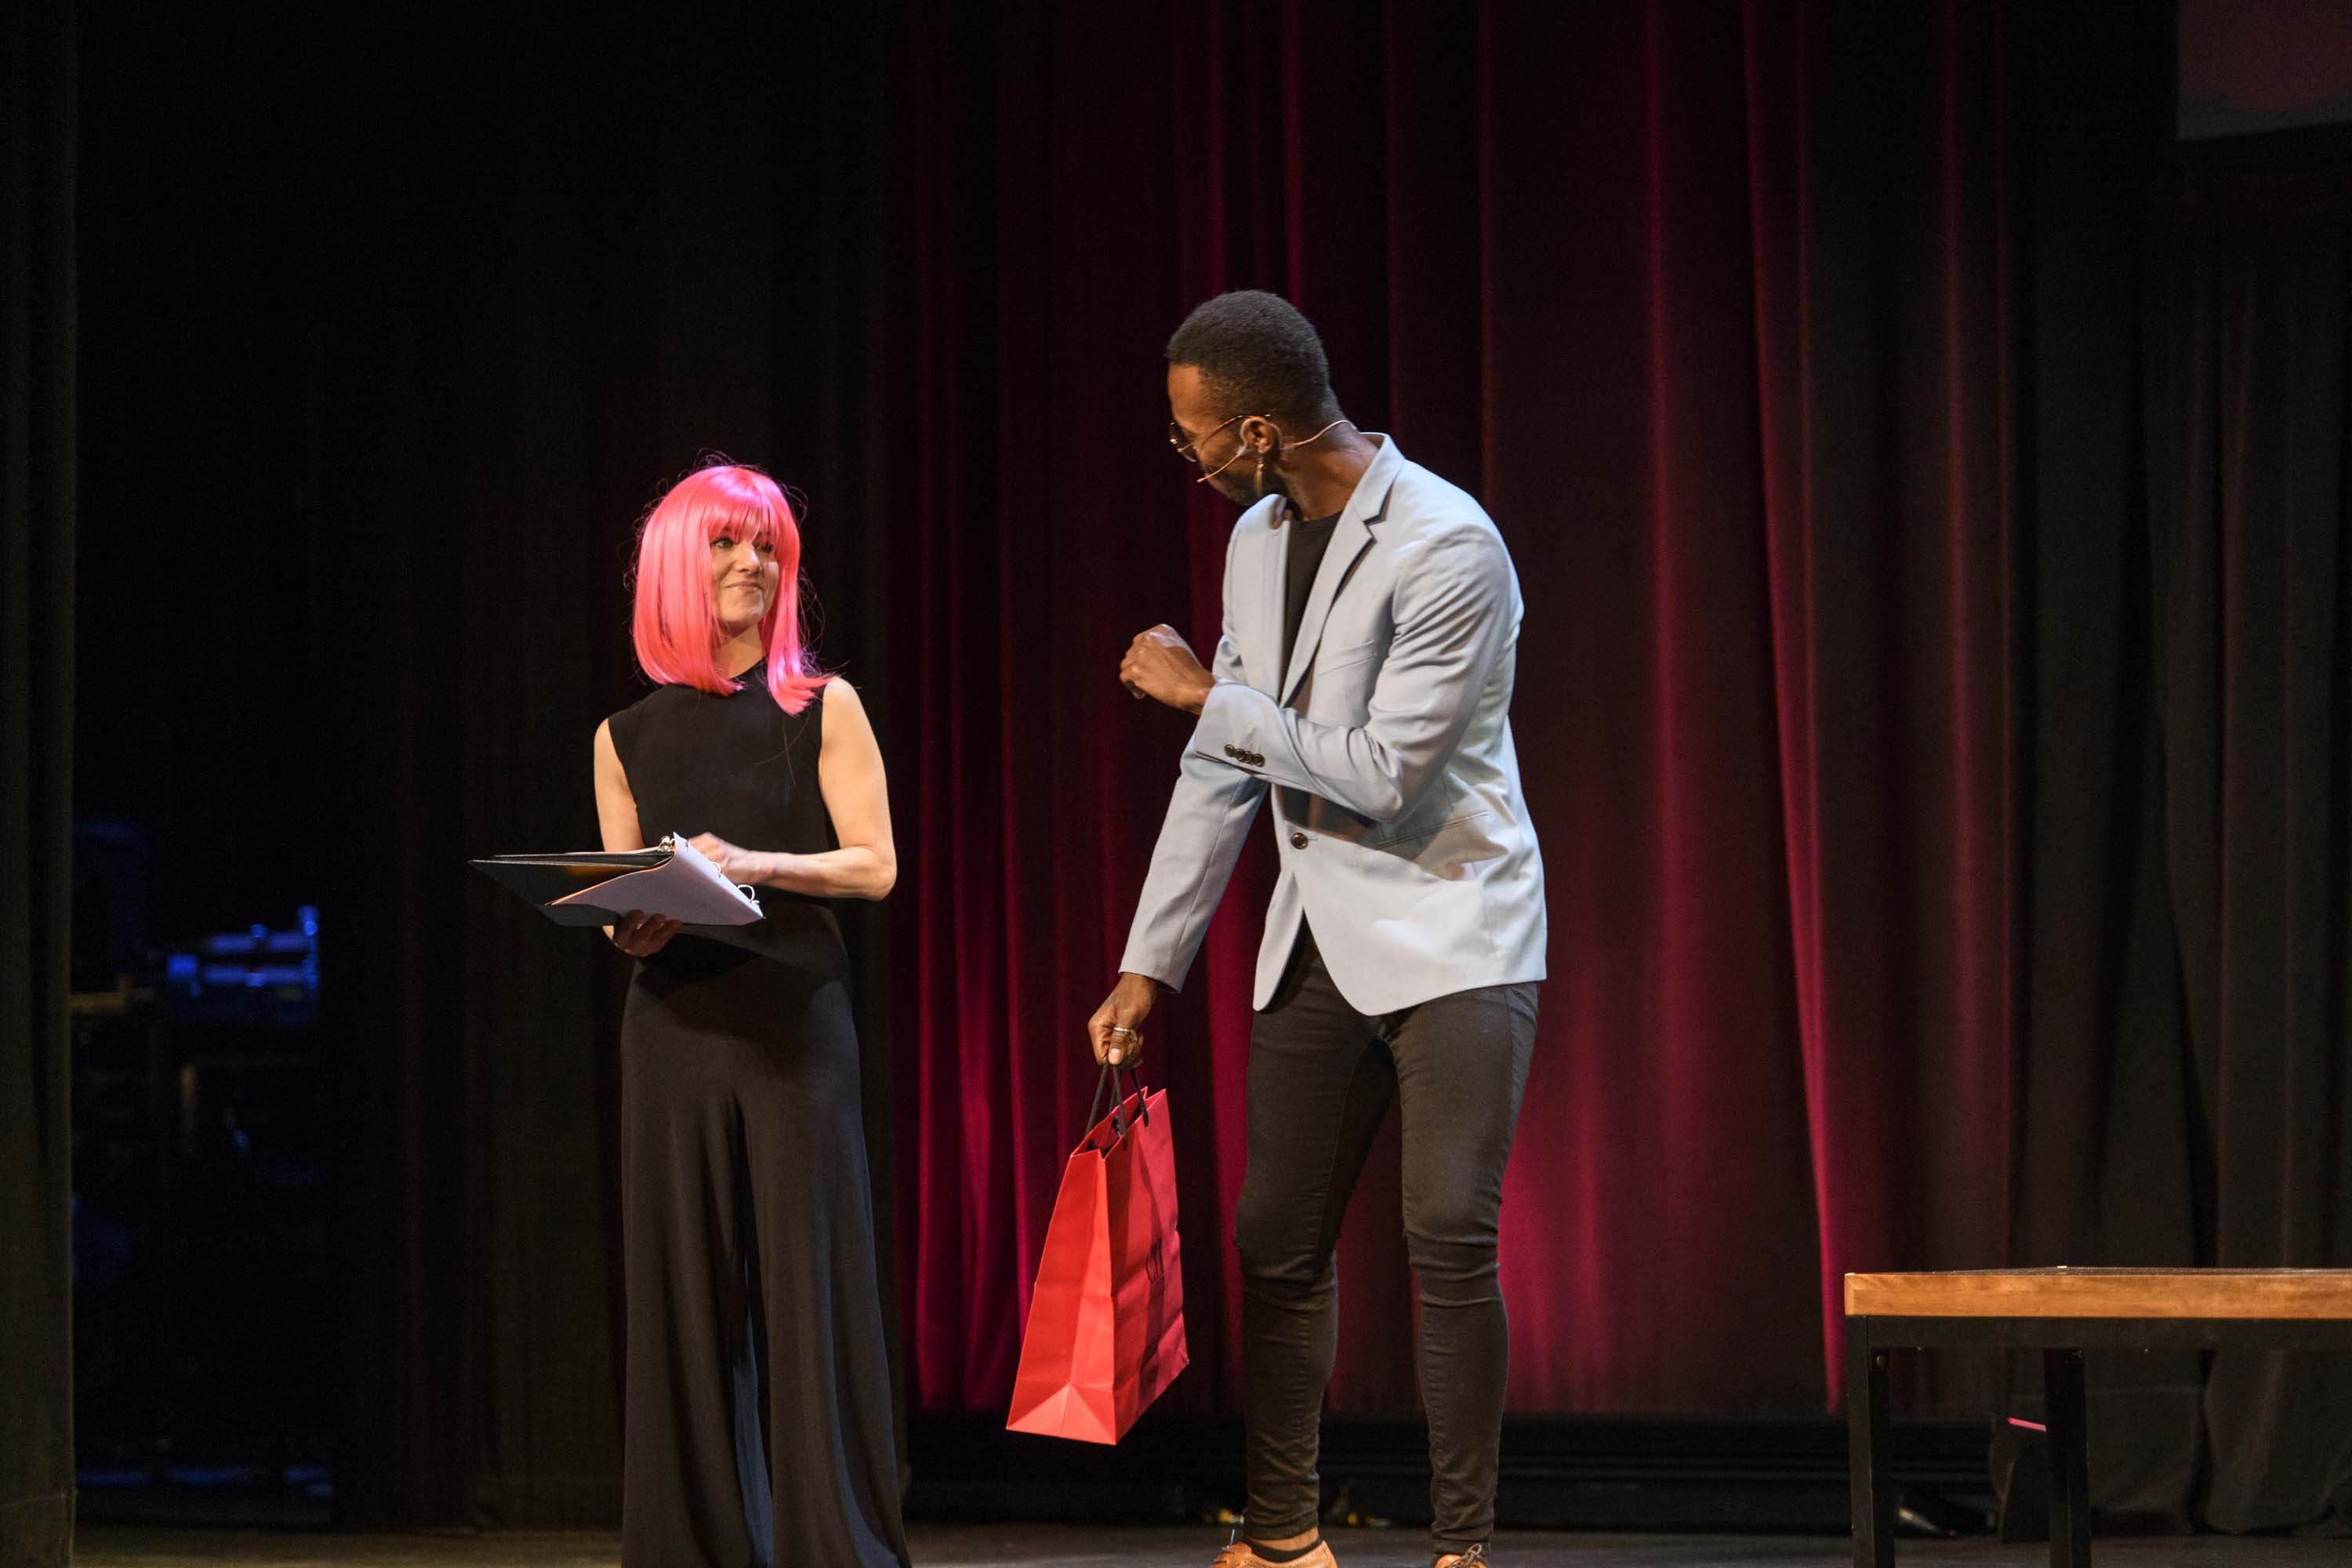 Woman in pink wig talks to man on stage